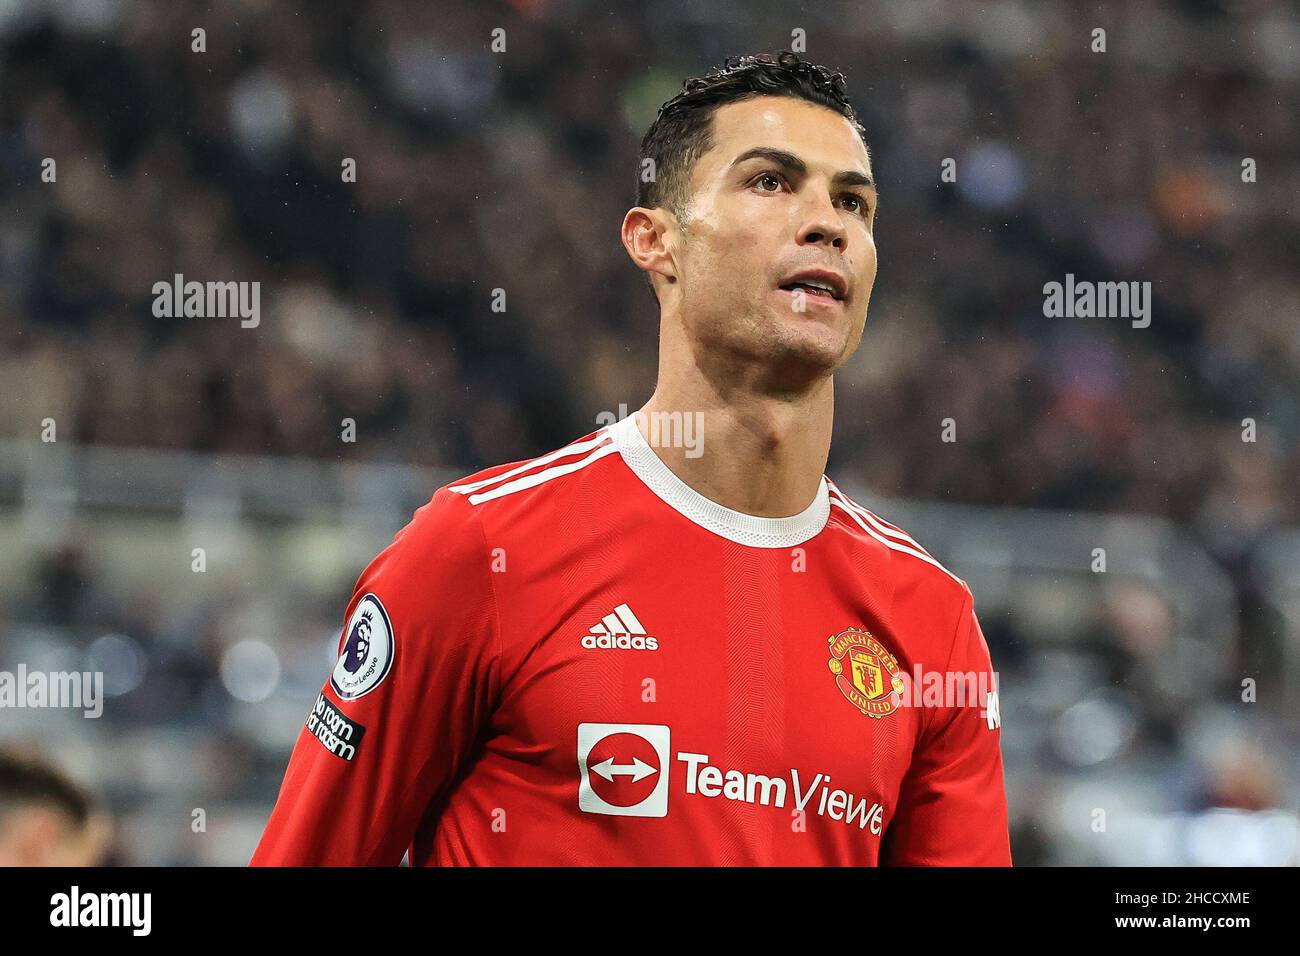 Cristiano Ronaldo #7 of Manchester United reacts to his missed chance Stock Photo